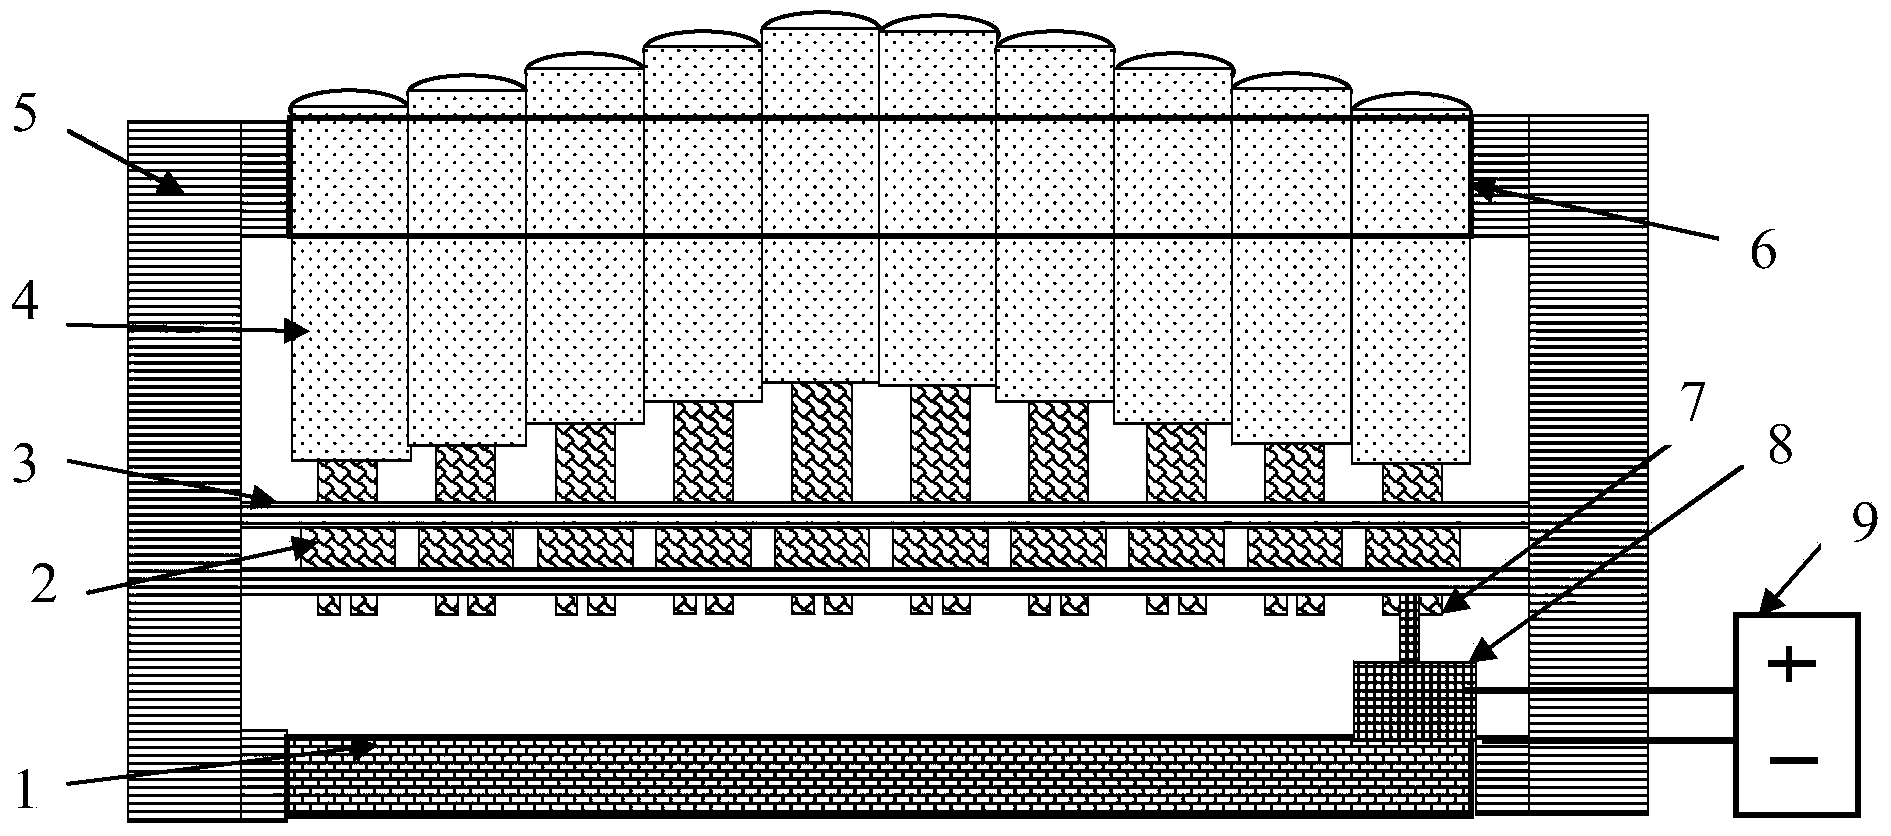 Three-dimensional telescopic display device capable of dynamically displaying pictures